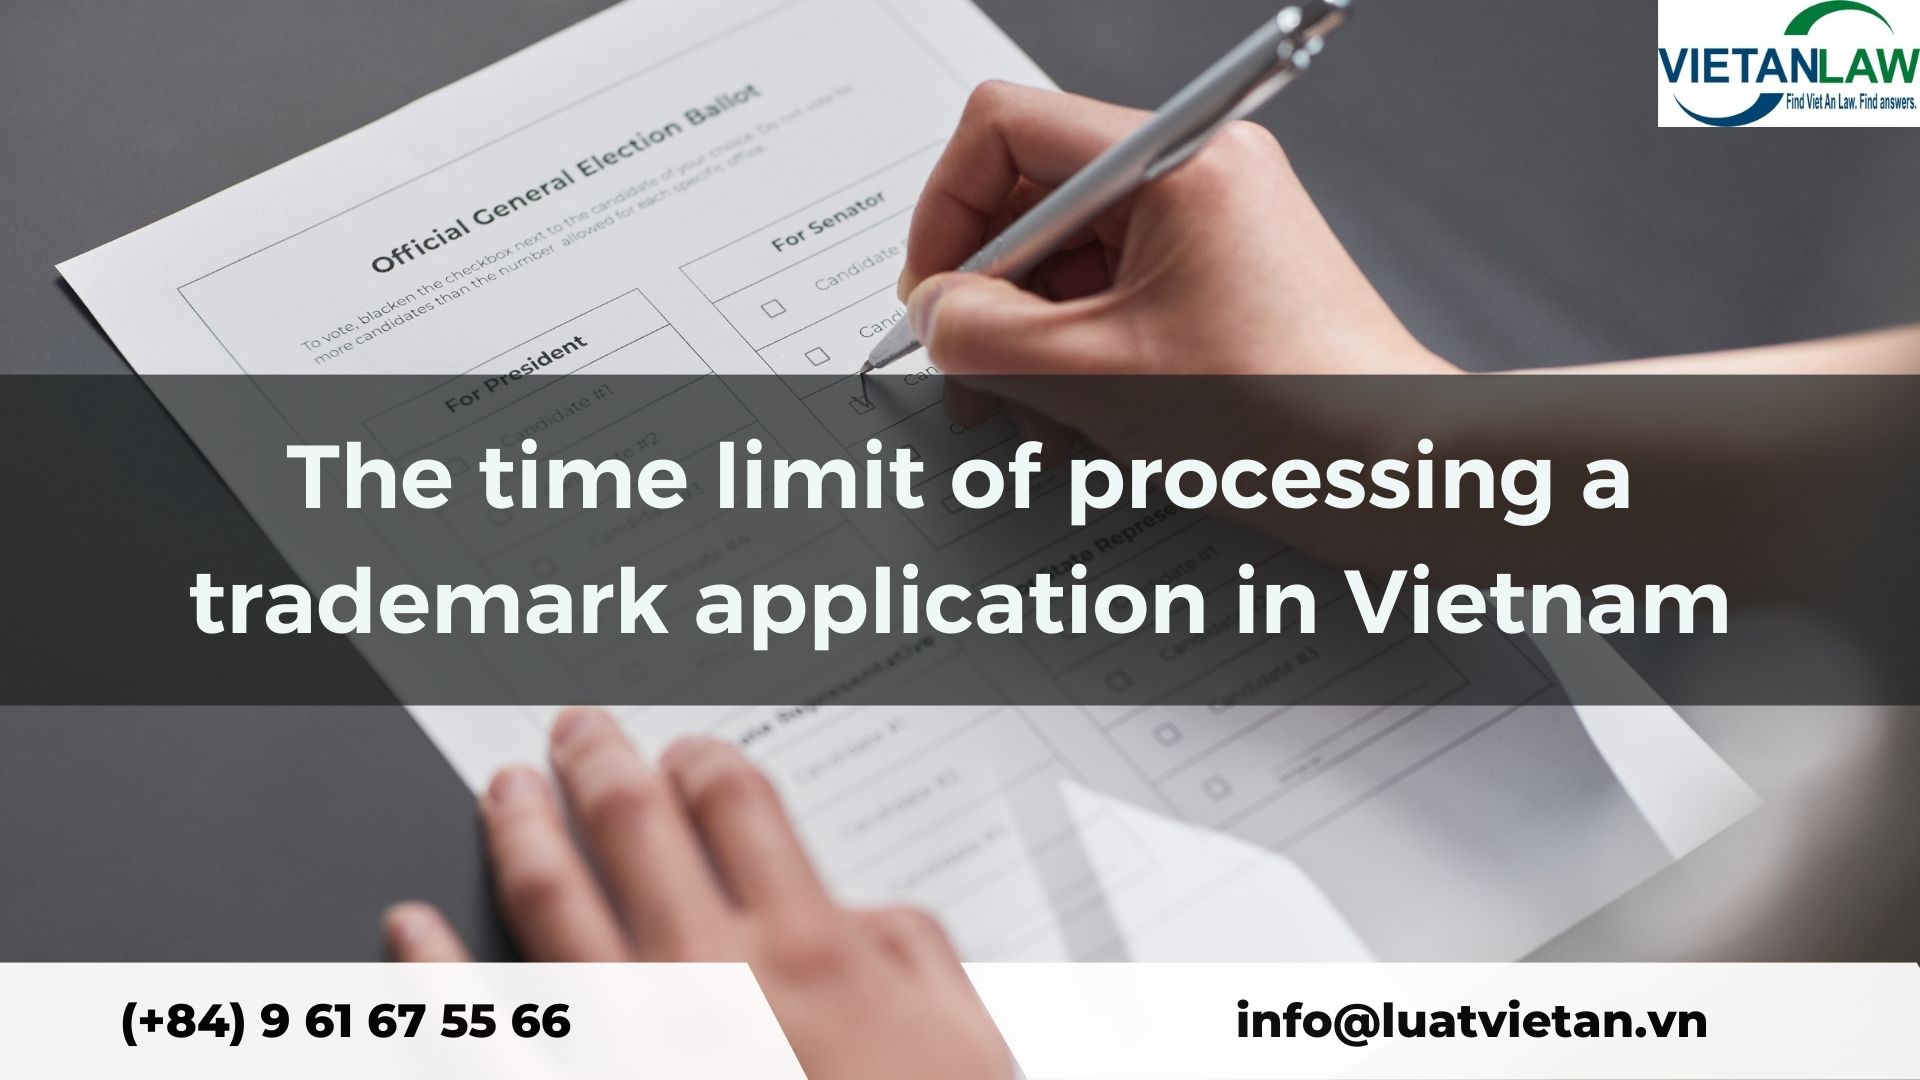 The time limit of processing a trademark application in Vietnam